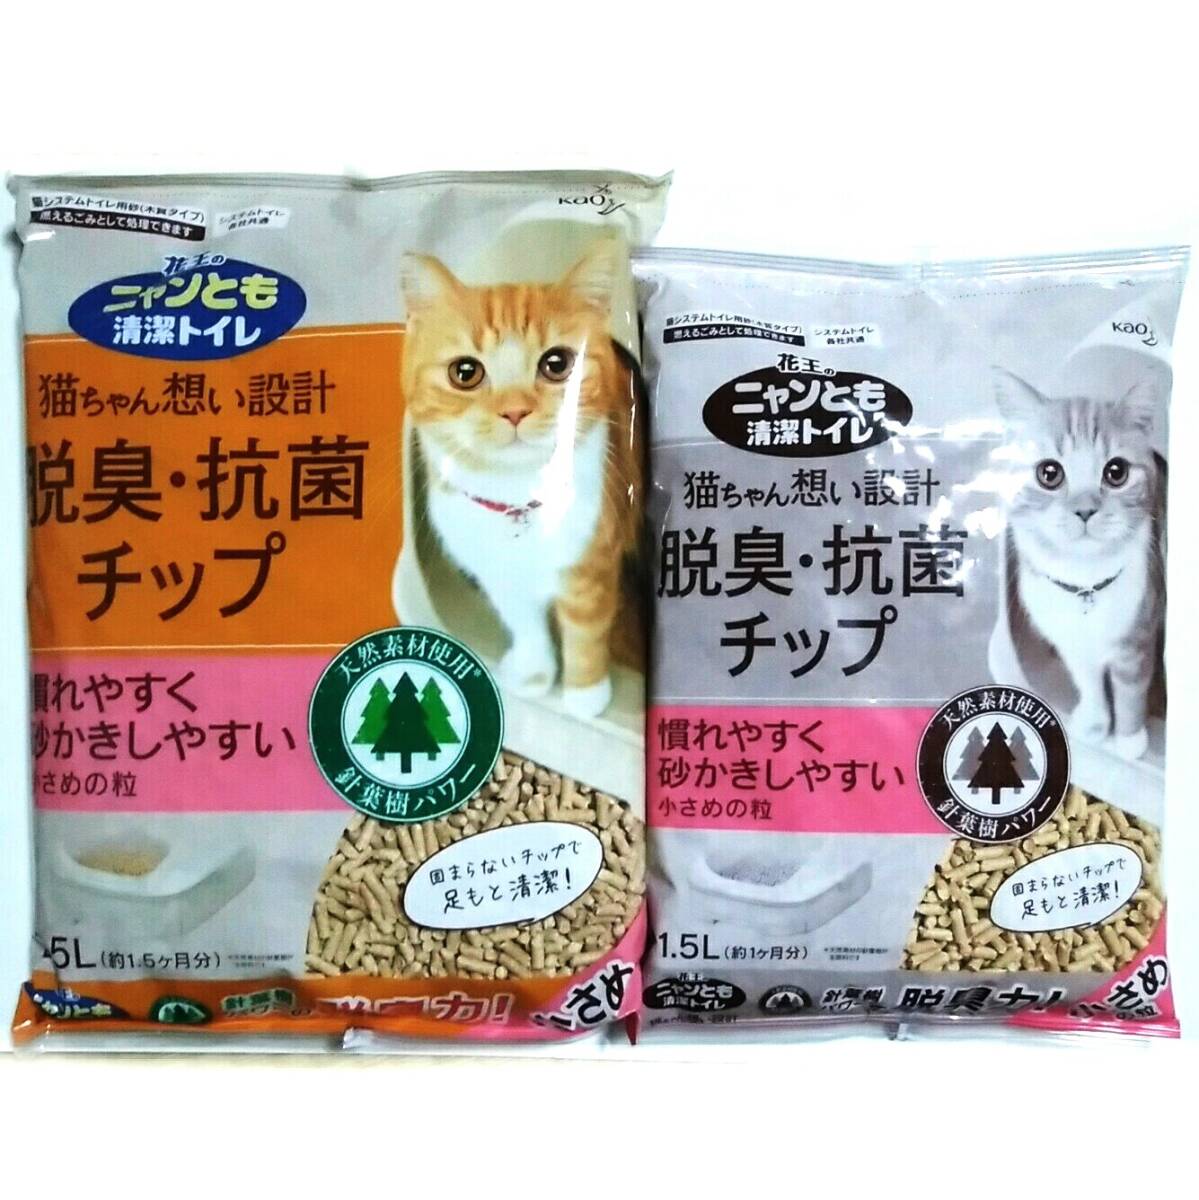 2 sack set Kao nyan.. clean toilet . smell * anti-bacterial chip smaller. bead 2.5L 1.5L total 4L cat sand cat toilet new goods unopened free shipping anonymity shipping 